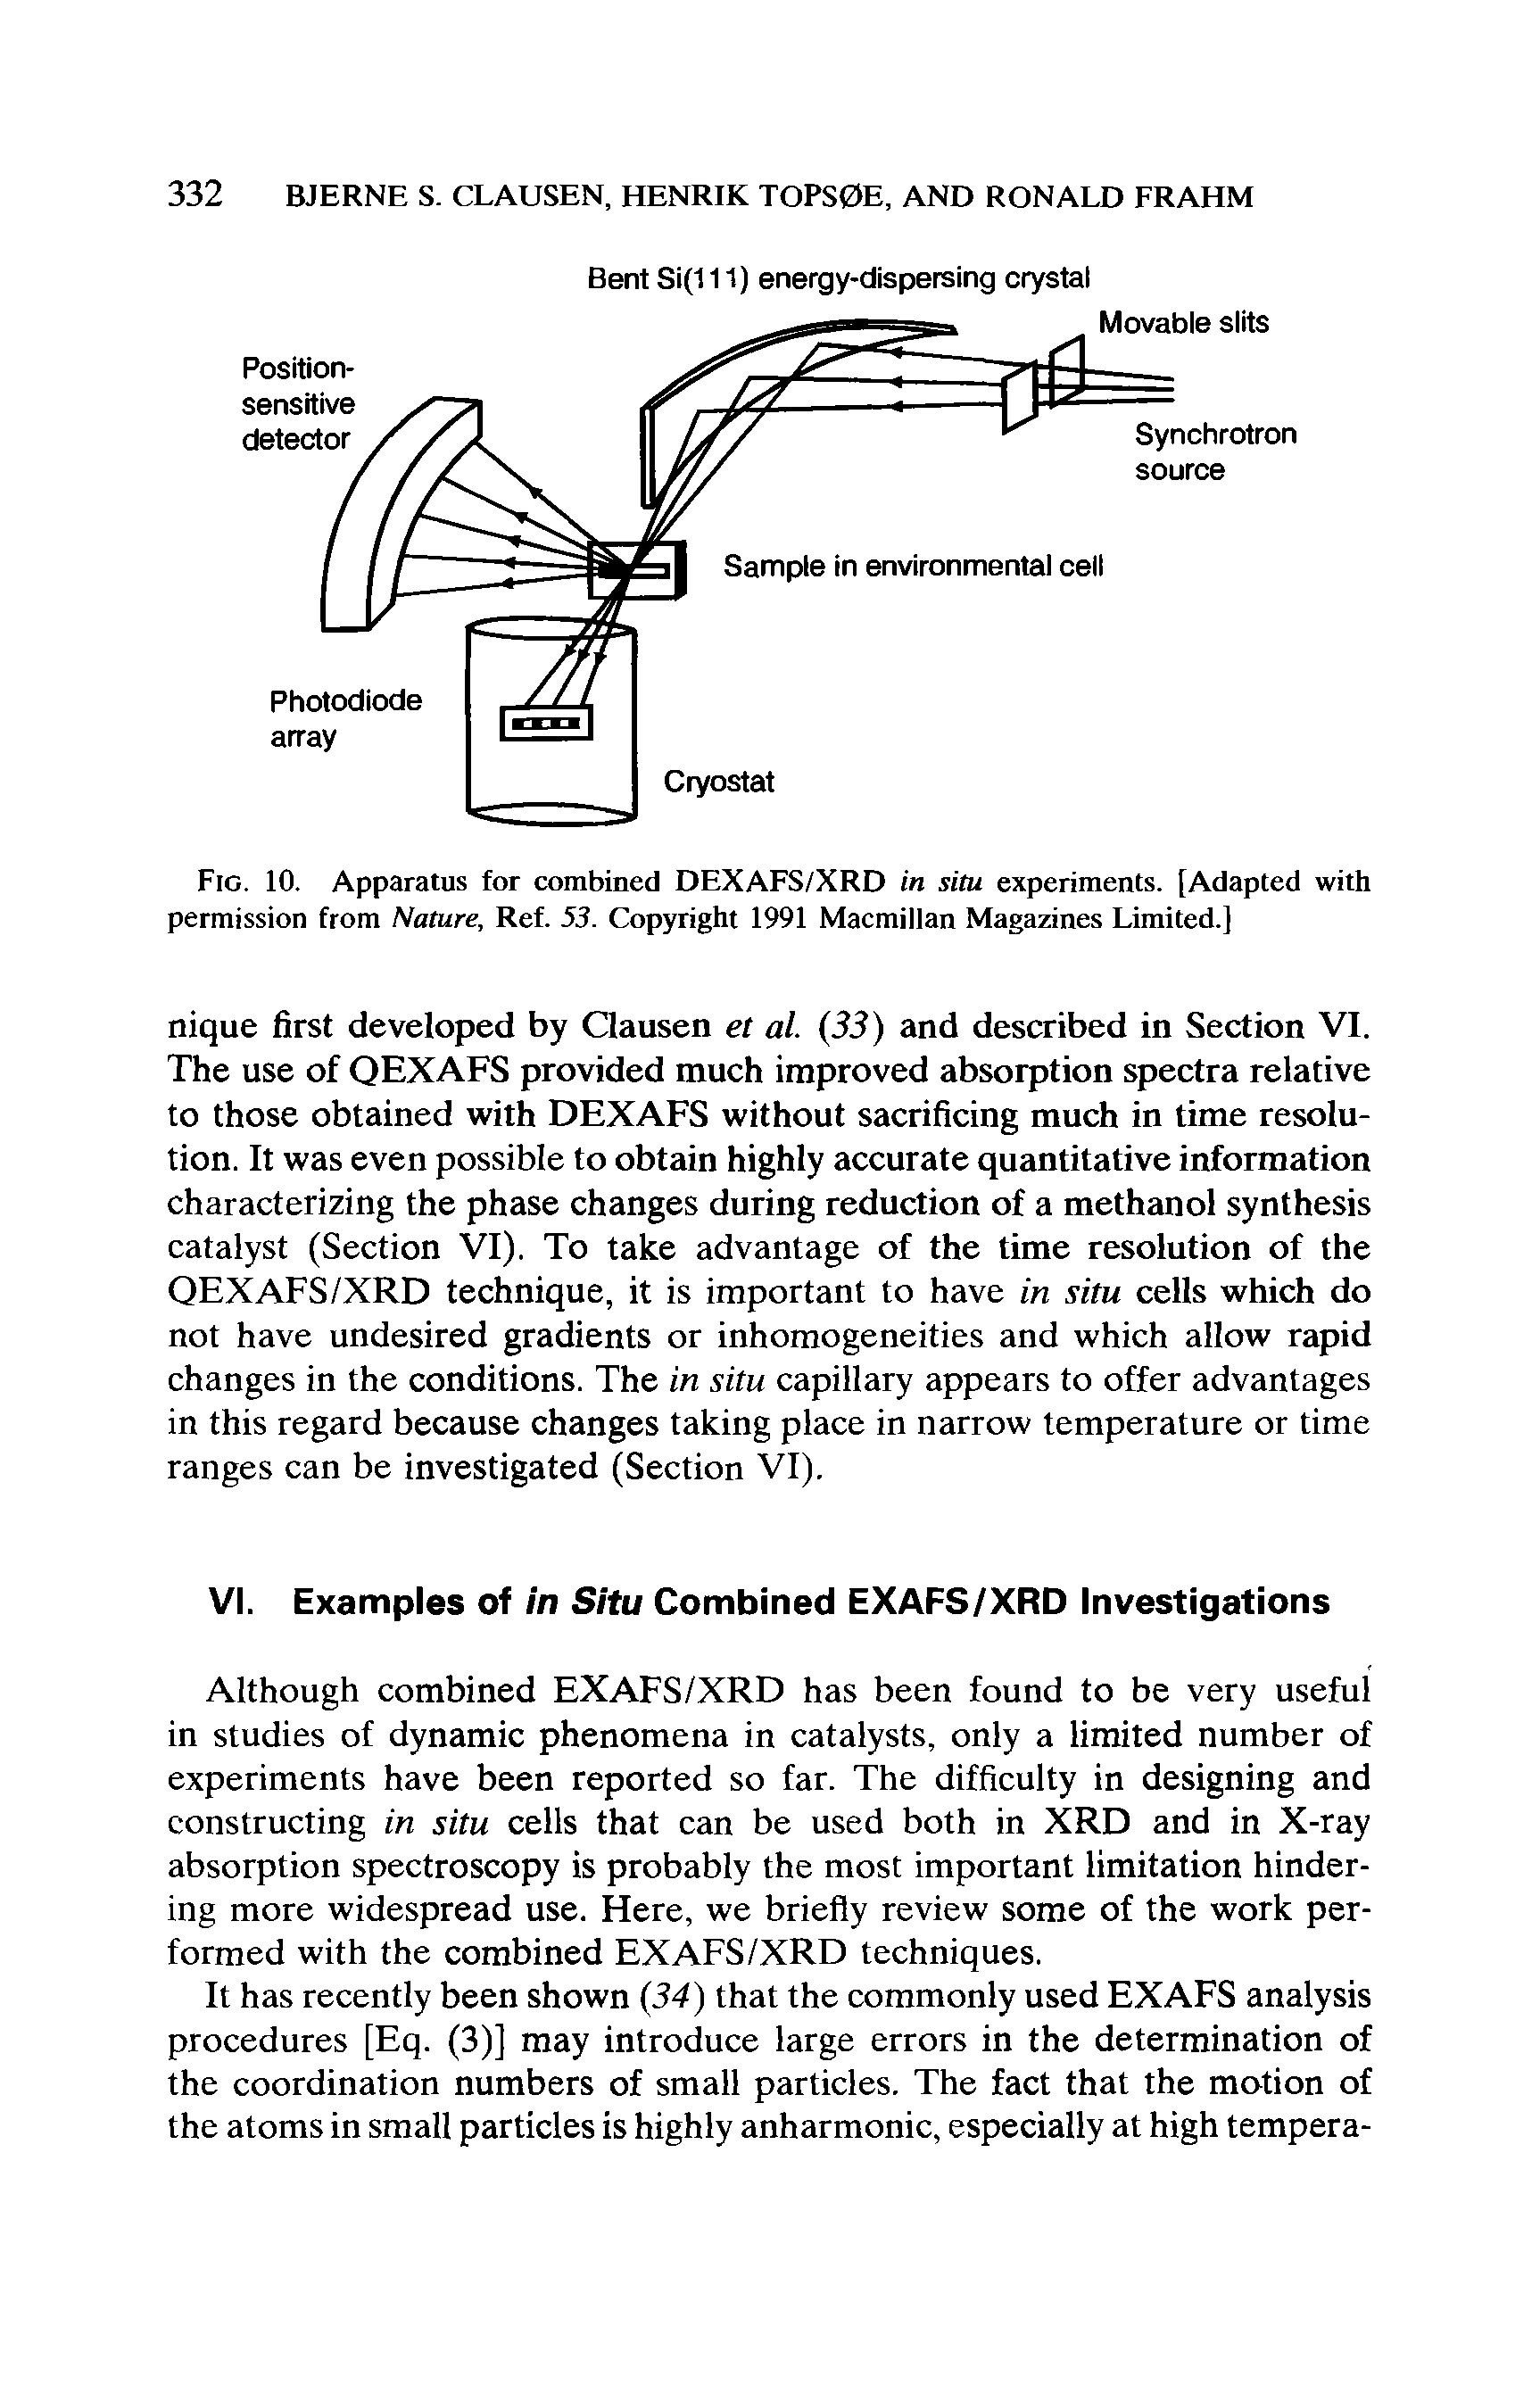 Fig. 10. Apparatus for combined DEXAFS/XRD in situ experiments. [Adapted with permission from Nature, Ref. 53. Copyright 1991 Macmillan Magazines Limited.]...